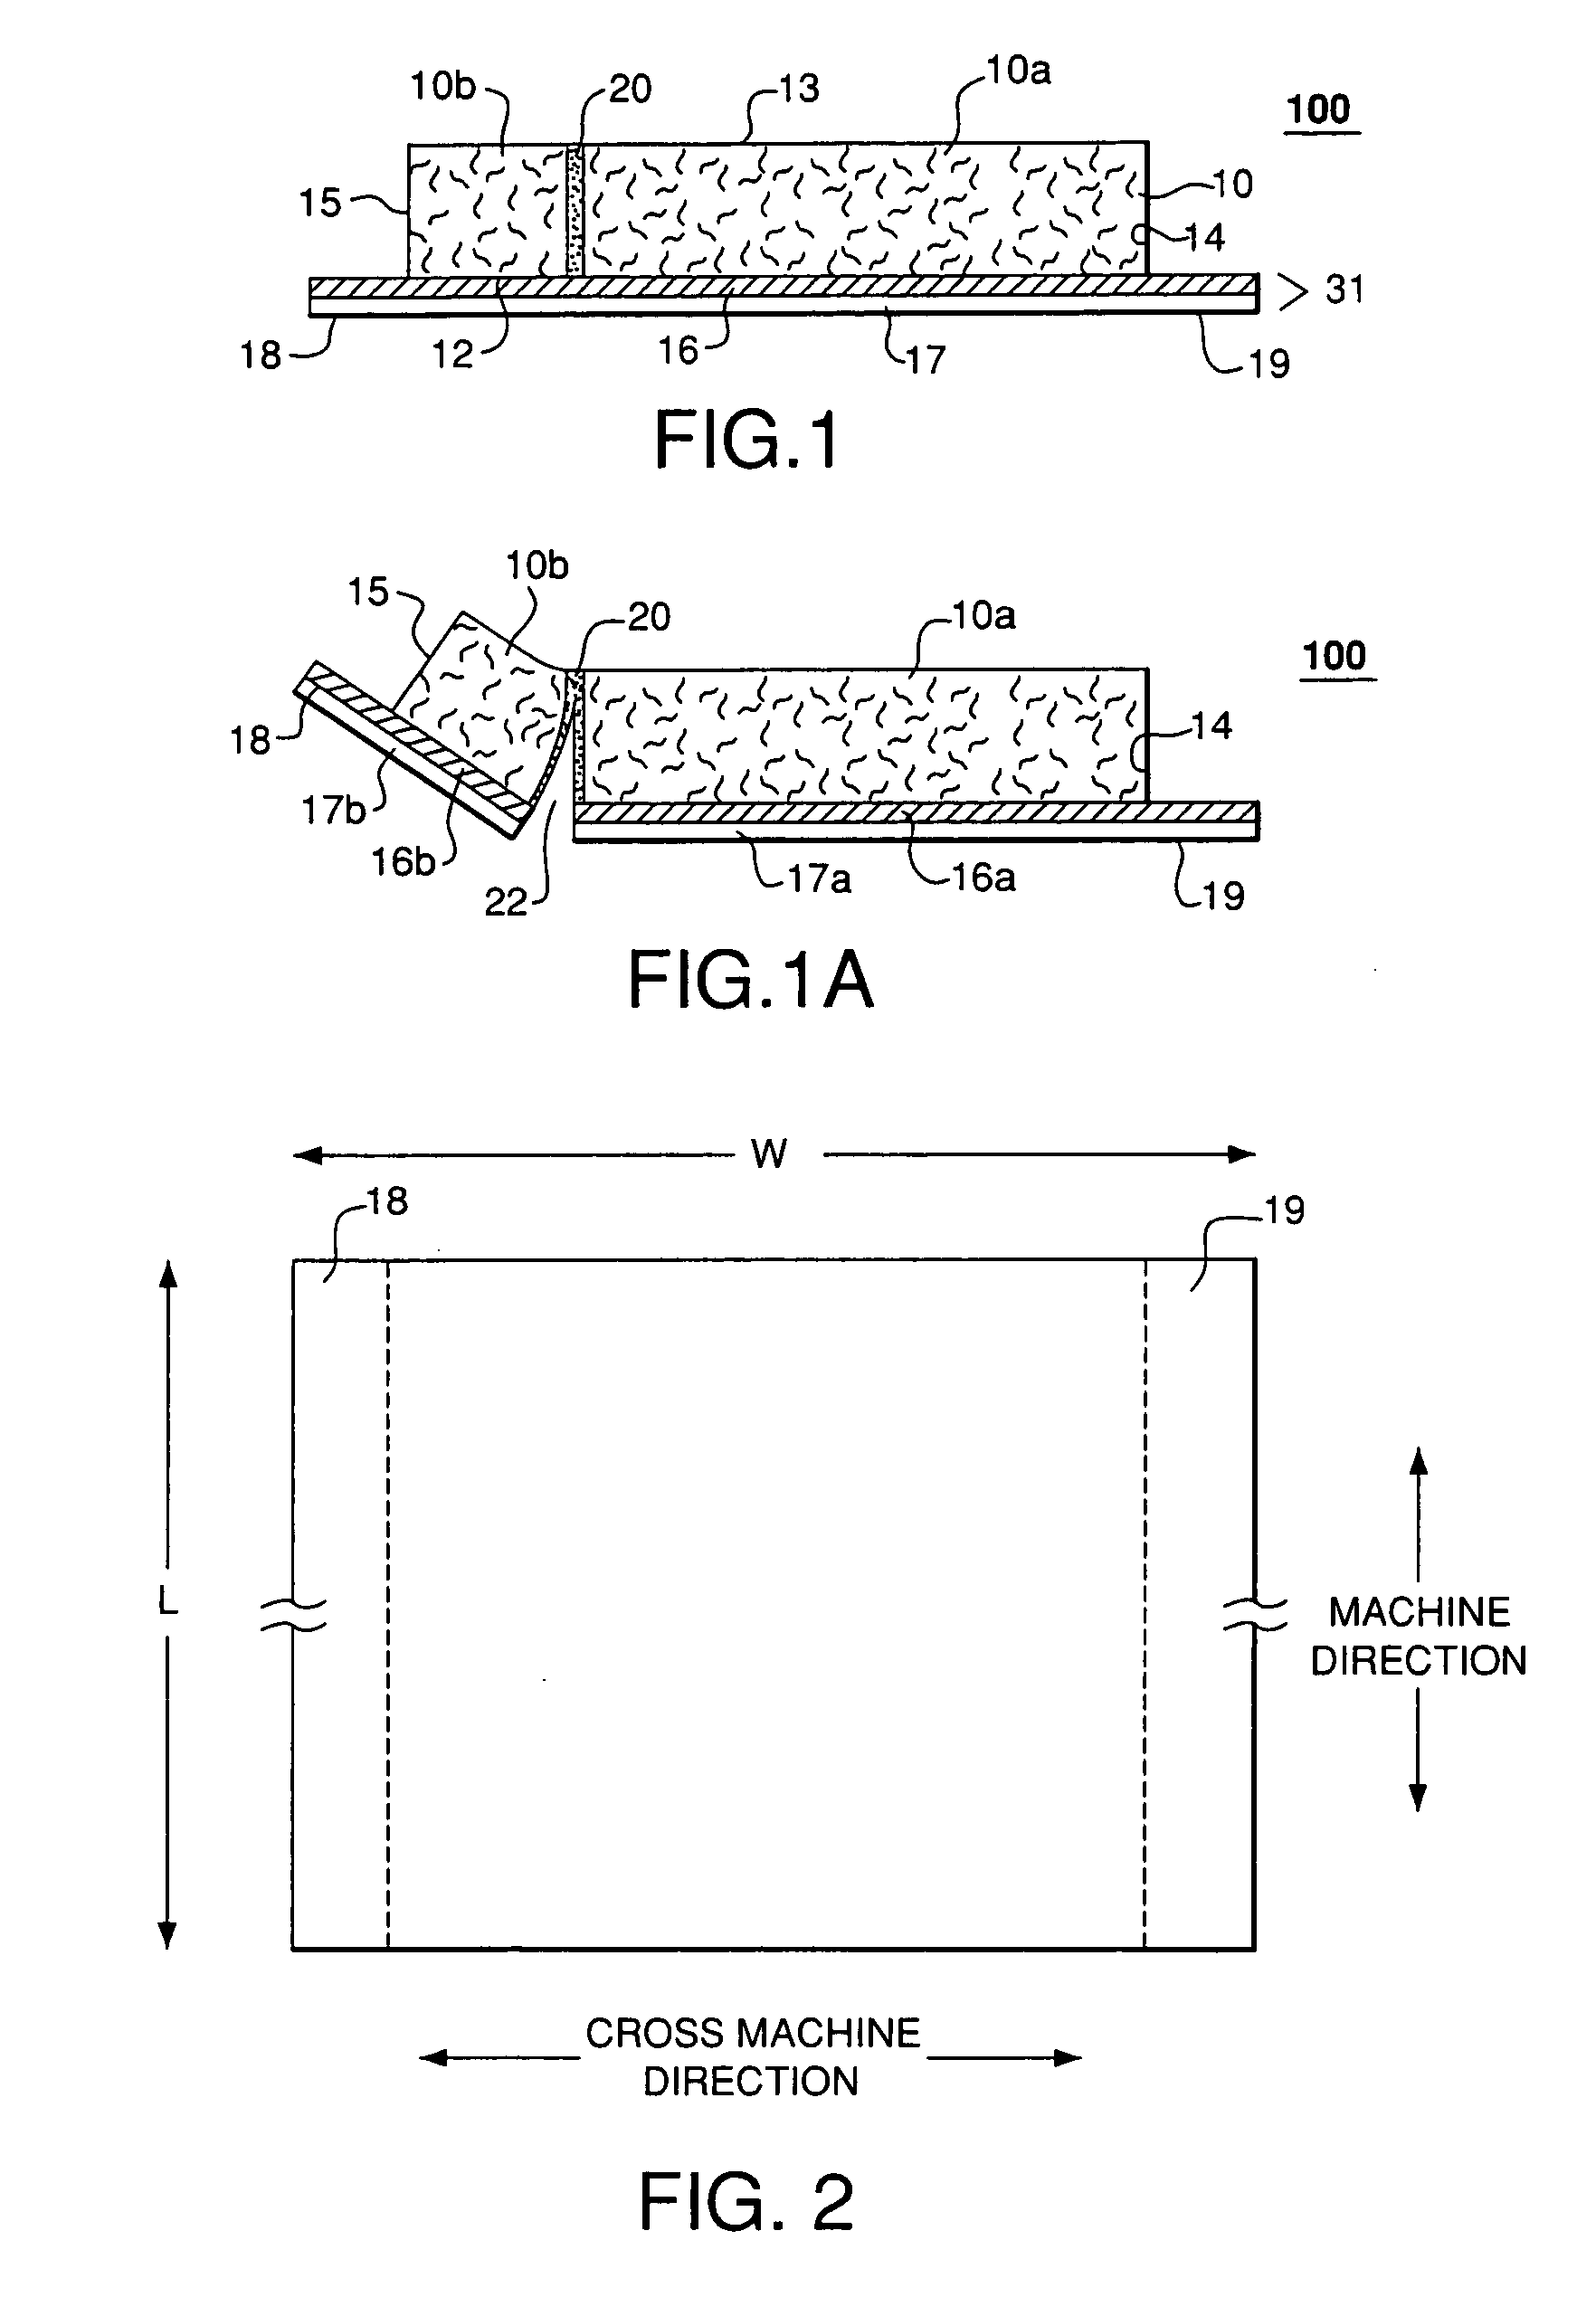 Insulation product having directional facing layer thereon and method of making the same